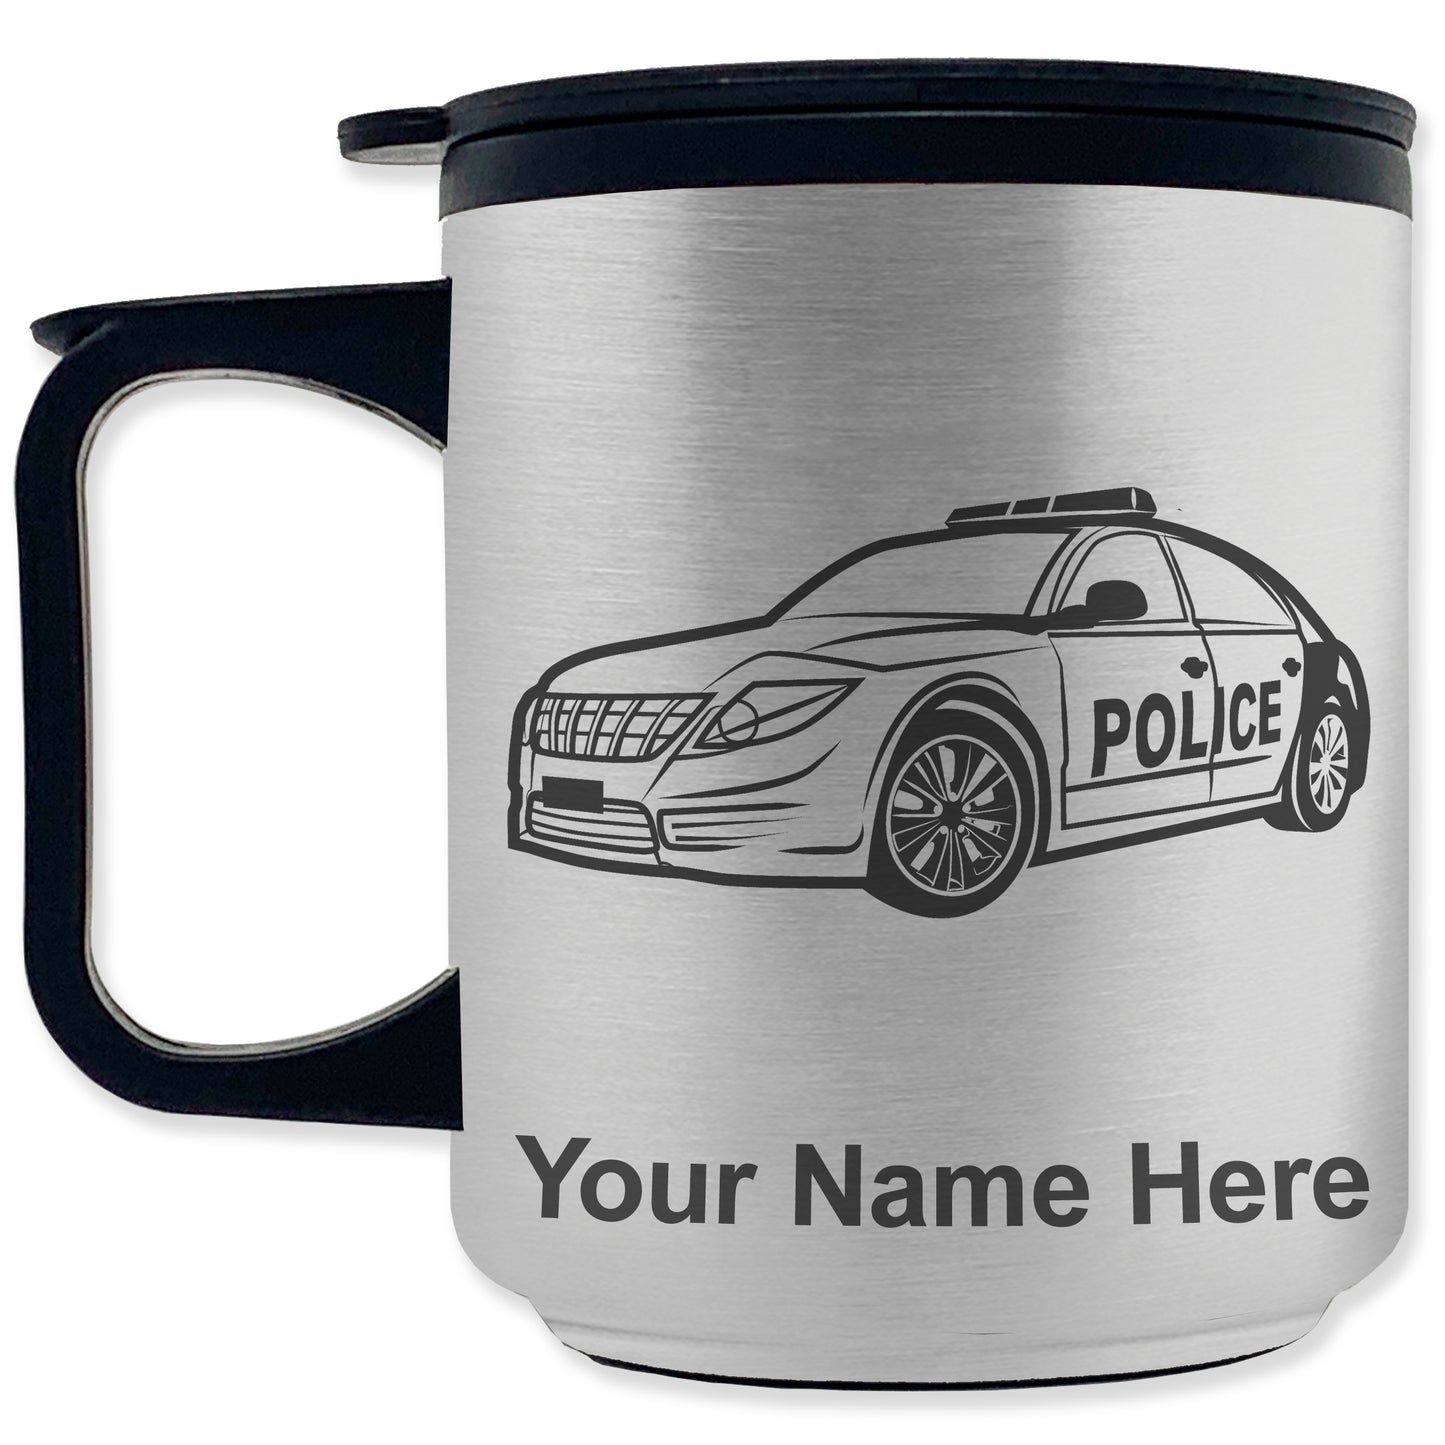 Coffee Travel Mug, Police Car, Personalized Engraving Included